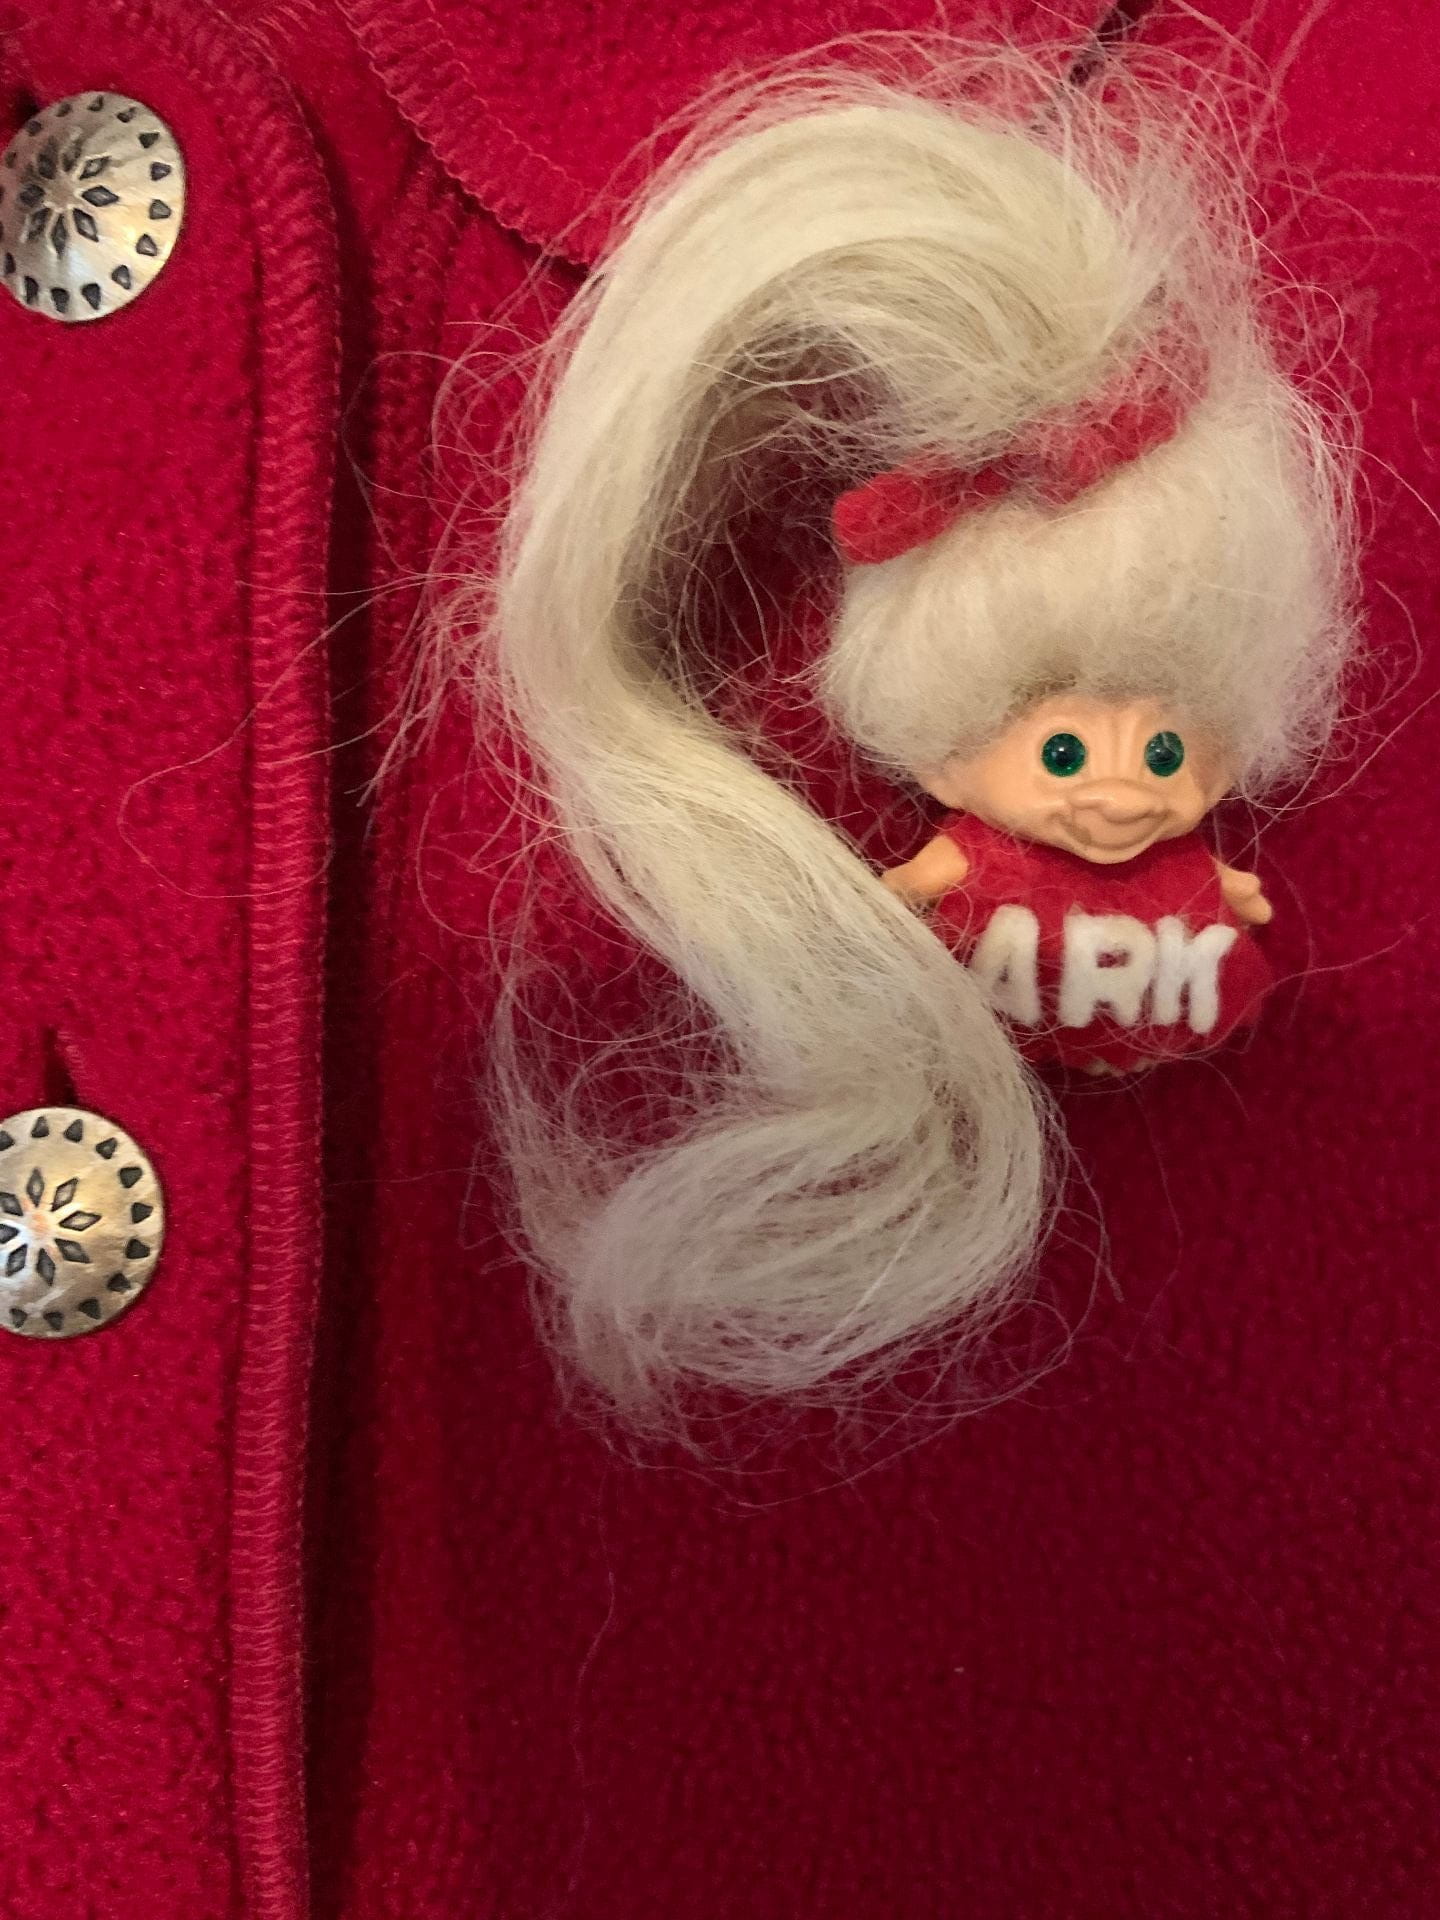 A small troll doll with long blonde hair held in a ponytail with a red bow. The doll wears a red dress that says 